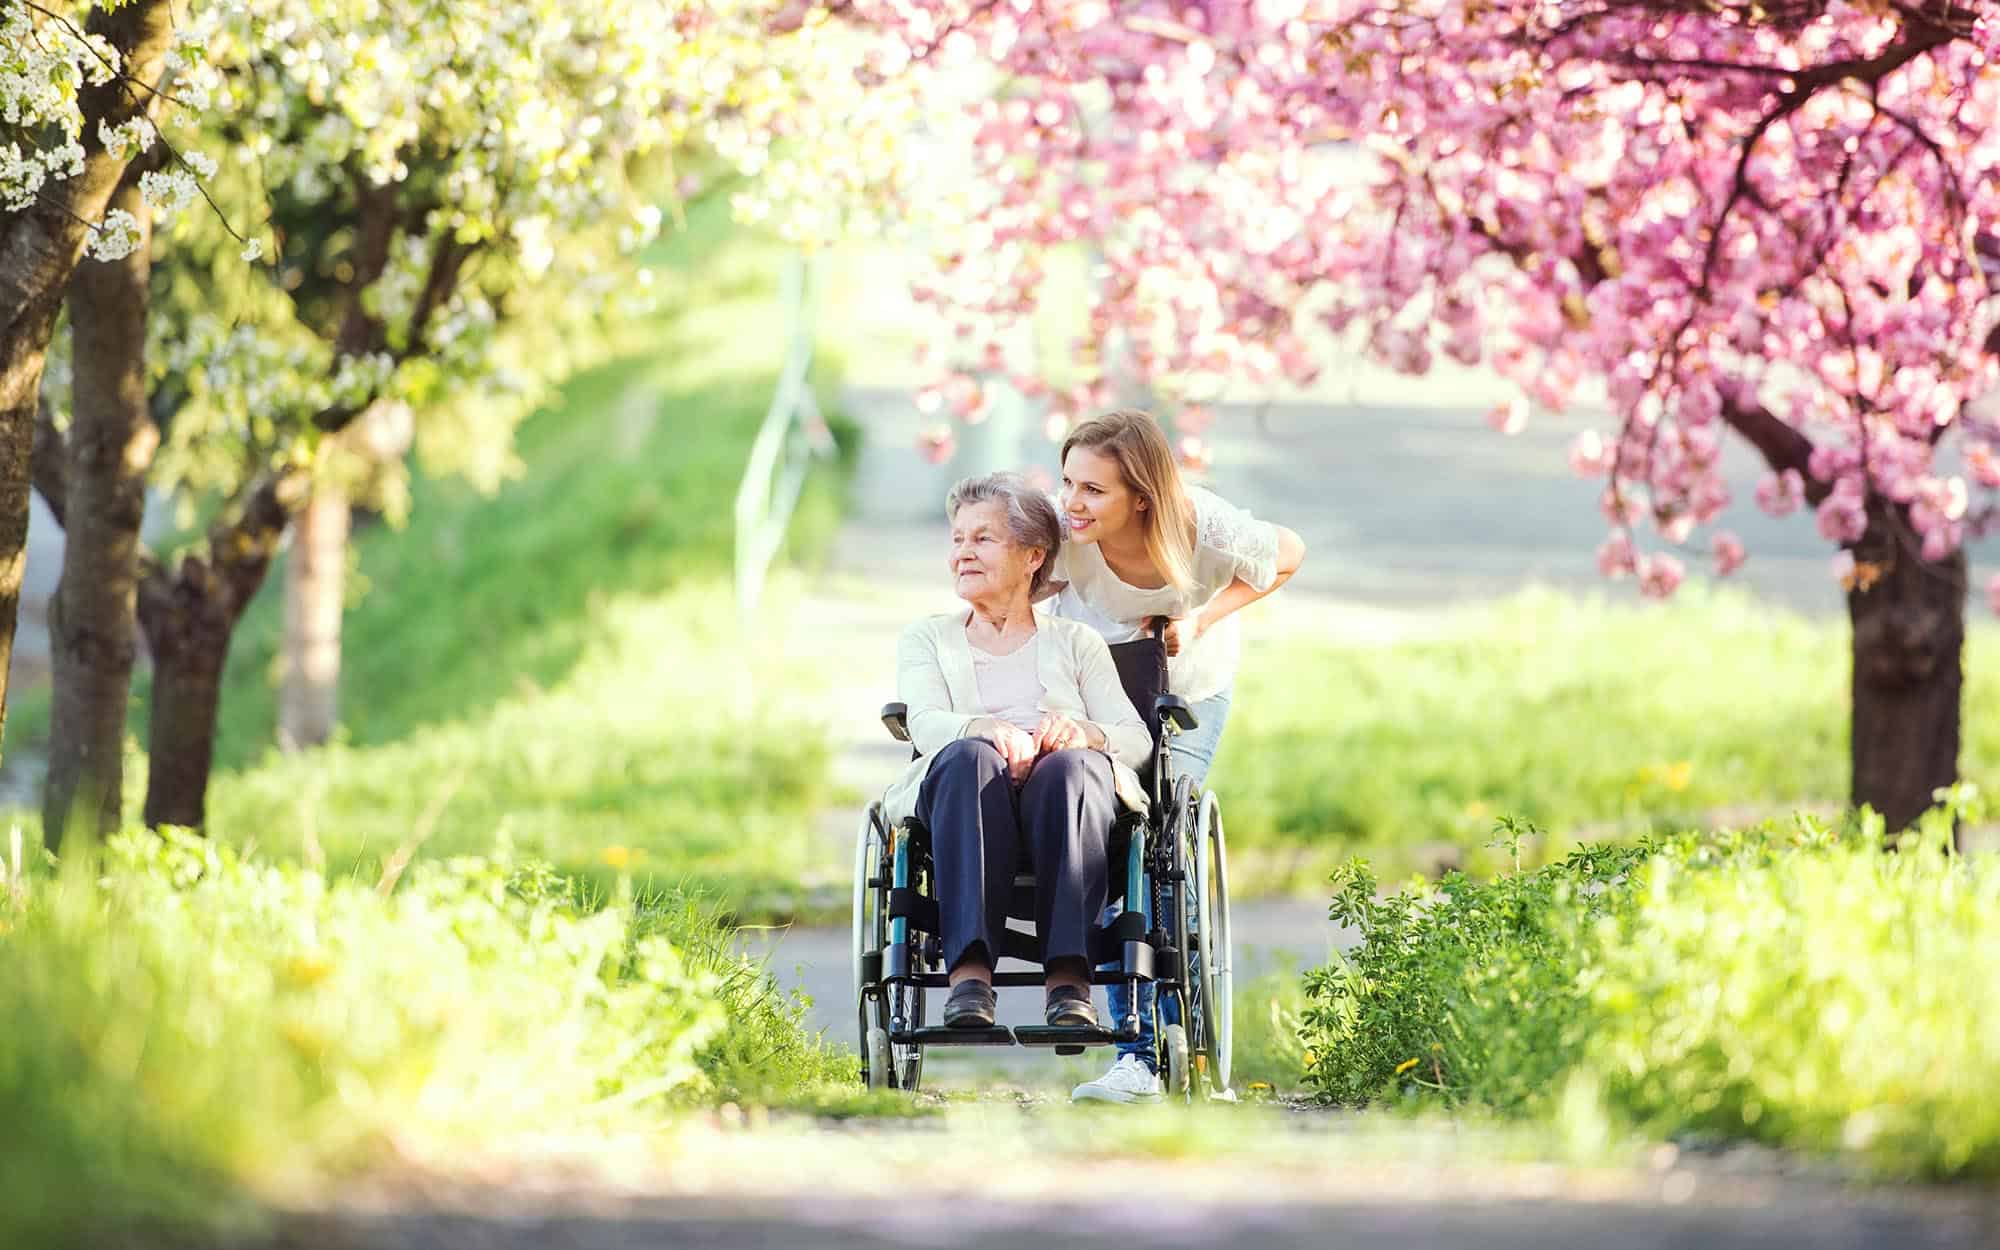 Elderly adult in wheelchair outside looking at the flowers with their adult child.